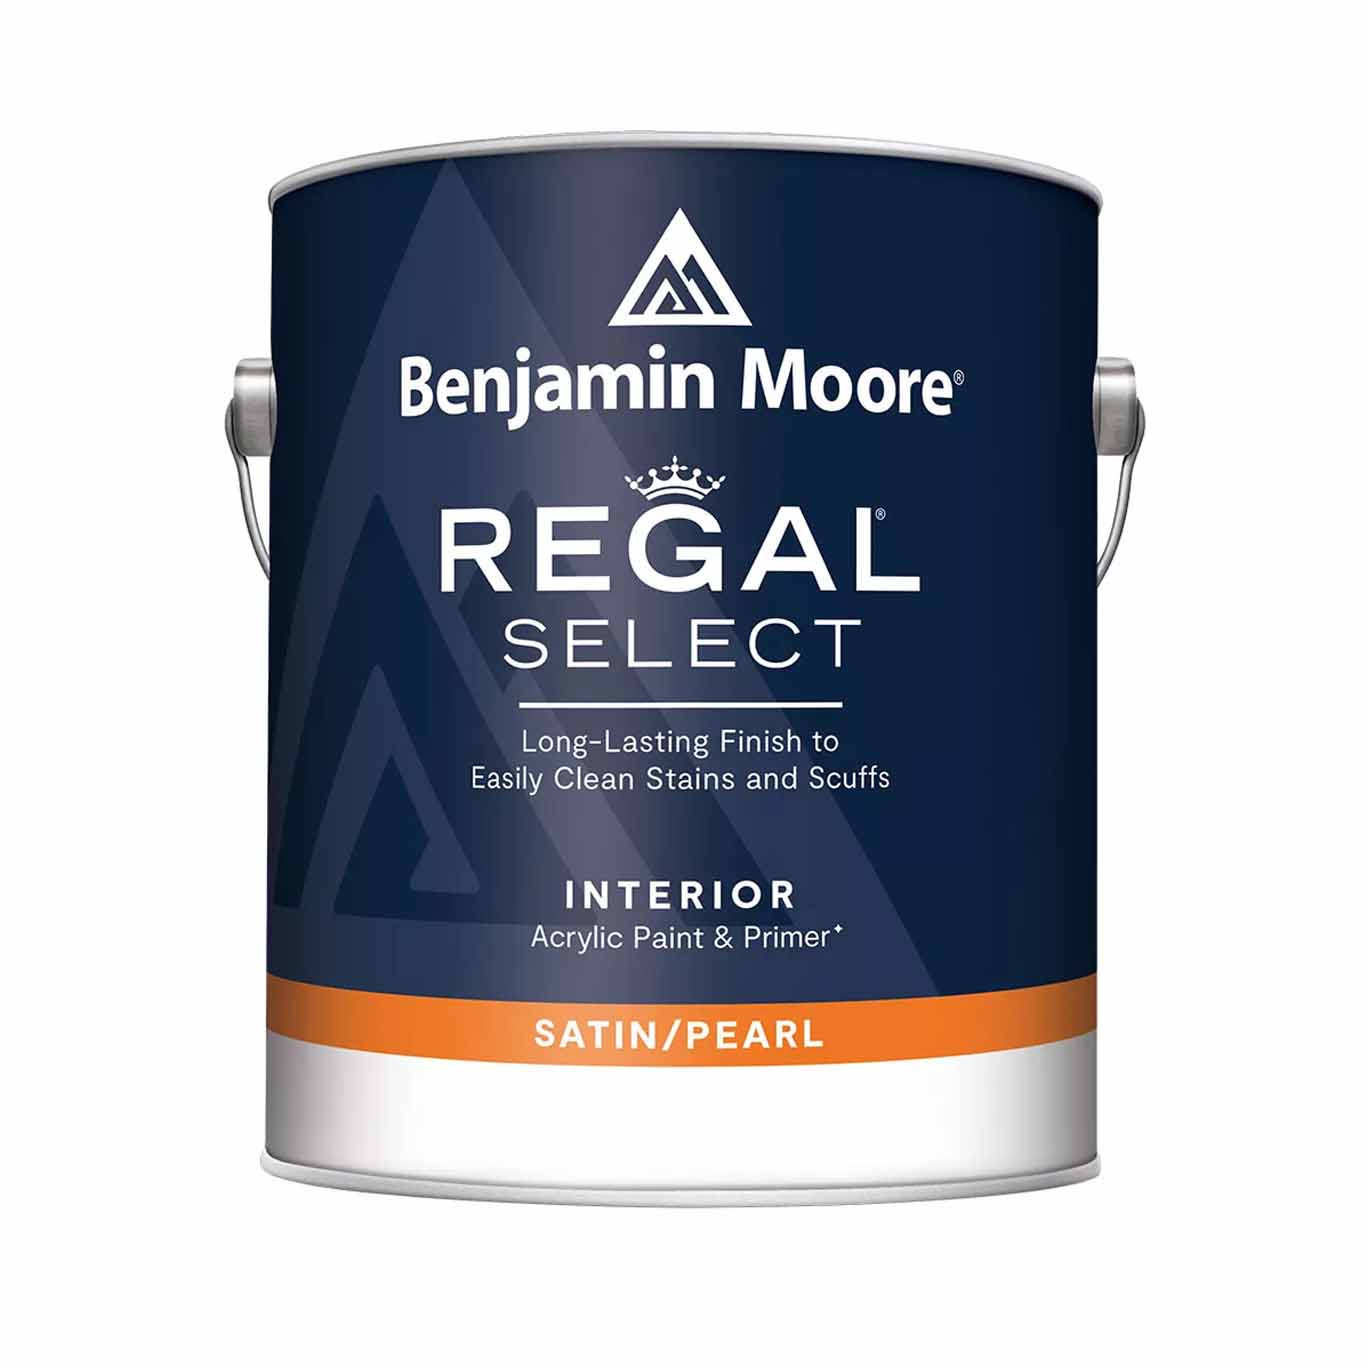 Regal Select Waterborne Interior Paint in Soft Shell